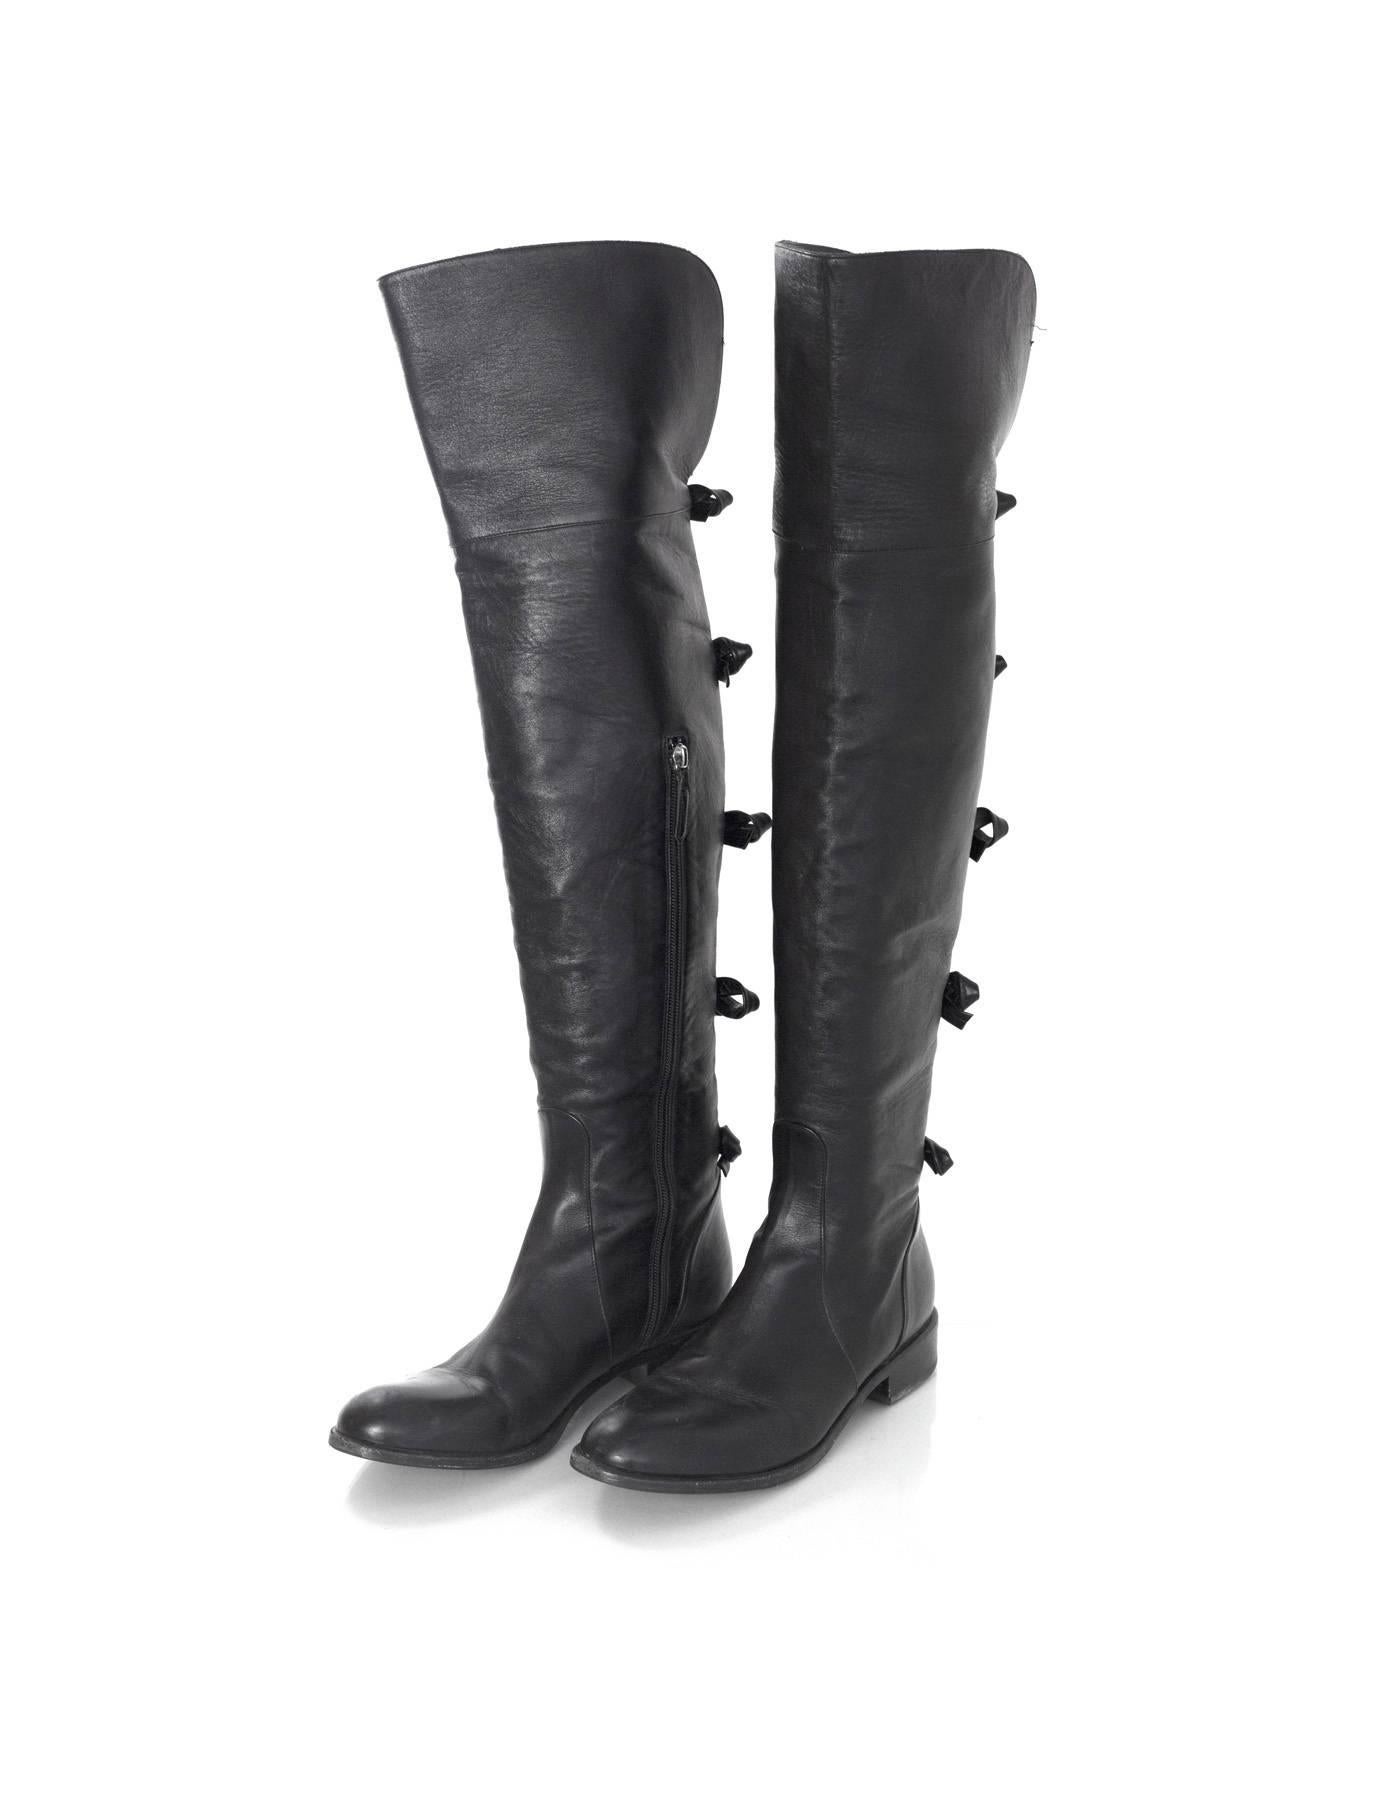 Valentino Black Leather Knee-High Boots 
Features black leather bows going down backs of boots

Made In: Italy
Color: Black
Materials: Leather
Closure/Opening: Pull on with inside zipper
Sole Stamp: Valentino Garavani Made In Italy 40
Retail Price: